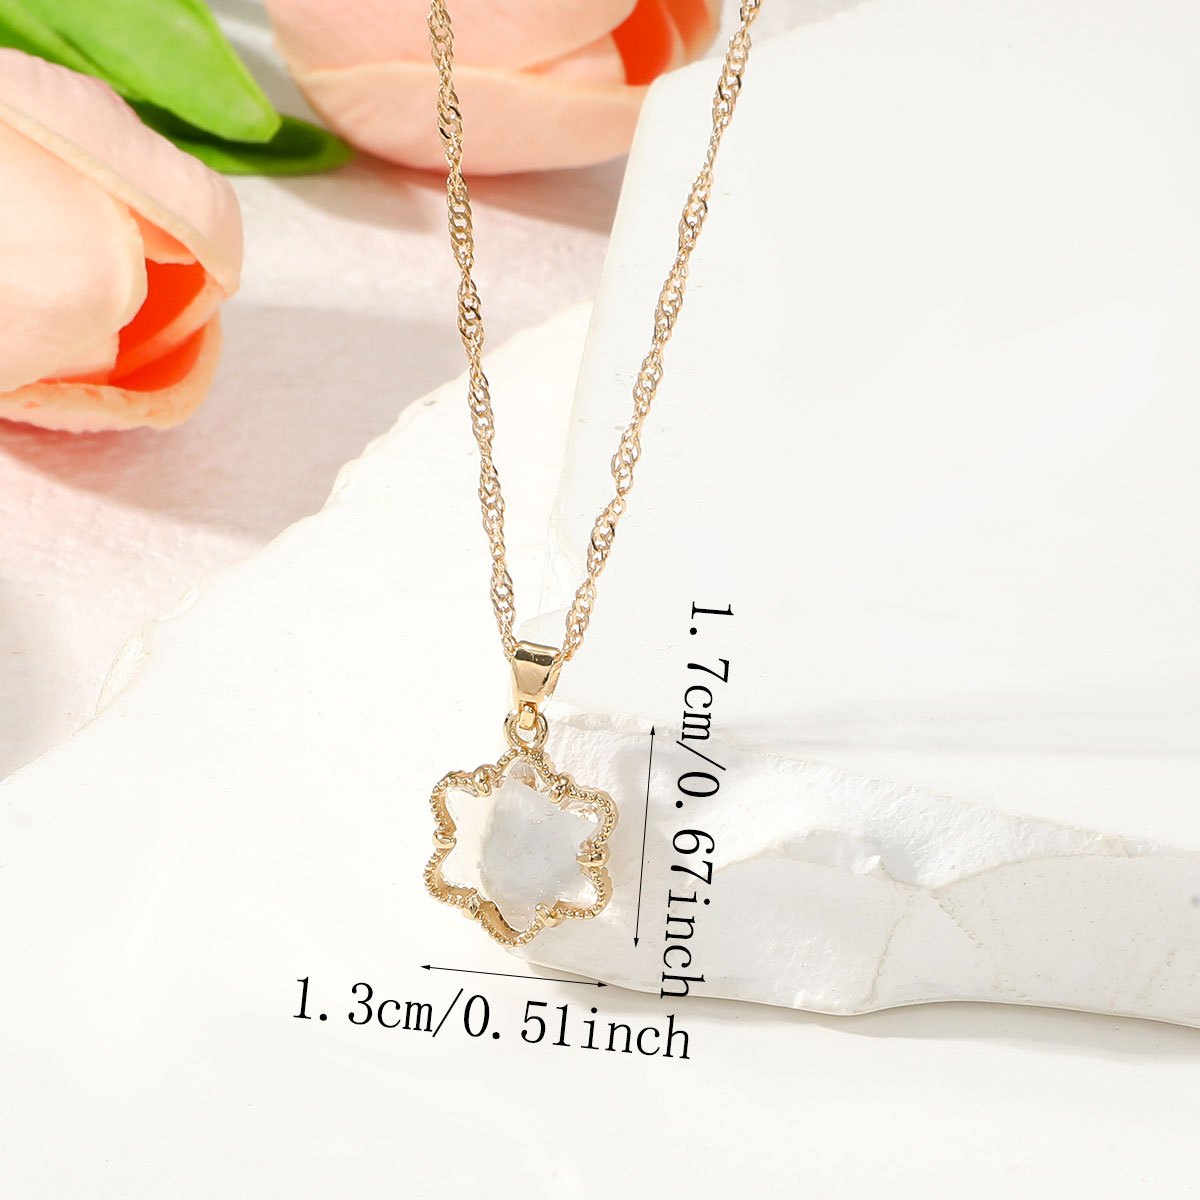 Buy Elegant Women's Gold Pendants , Necklaces, Charms and Chains